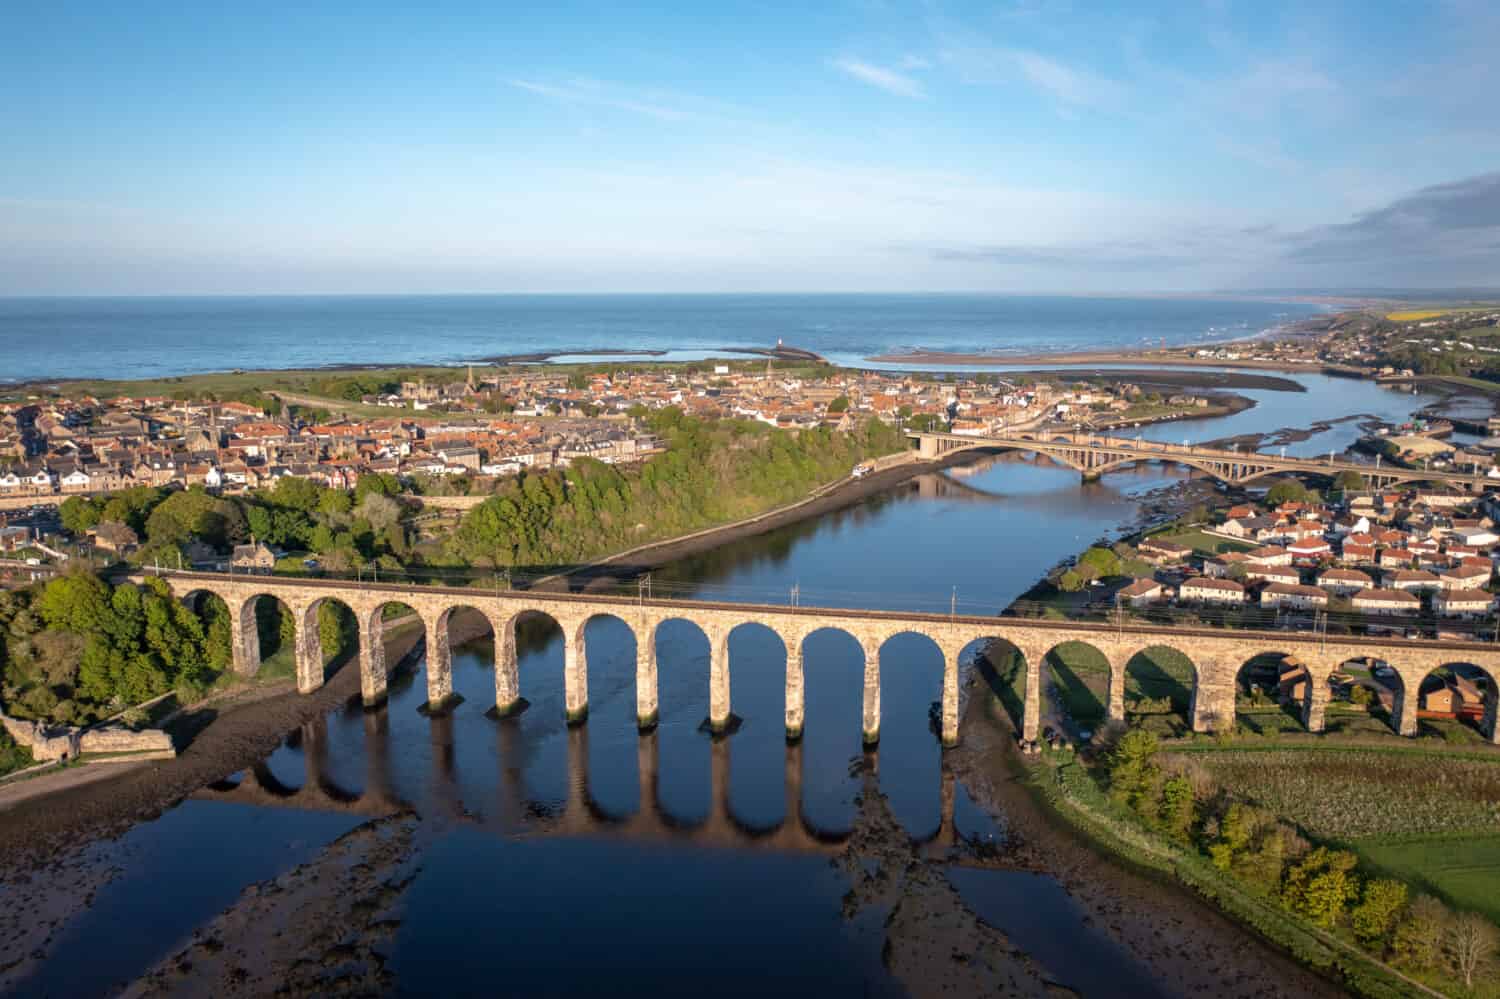 The Picturesque Coastal Town of Berwick upon Tweed in the UK